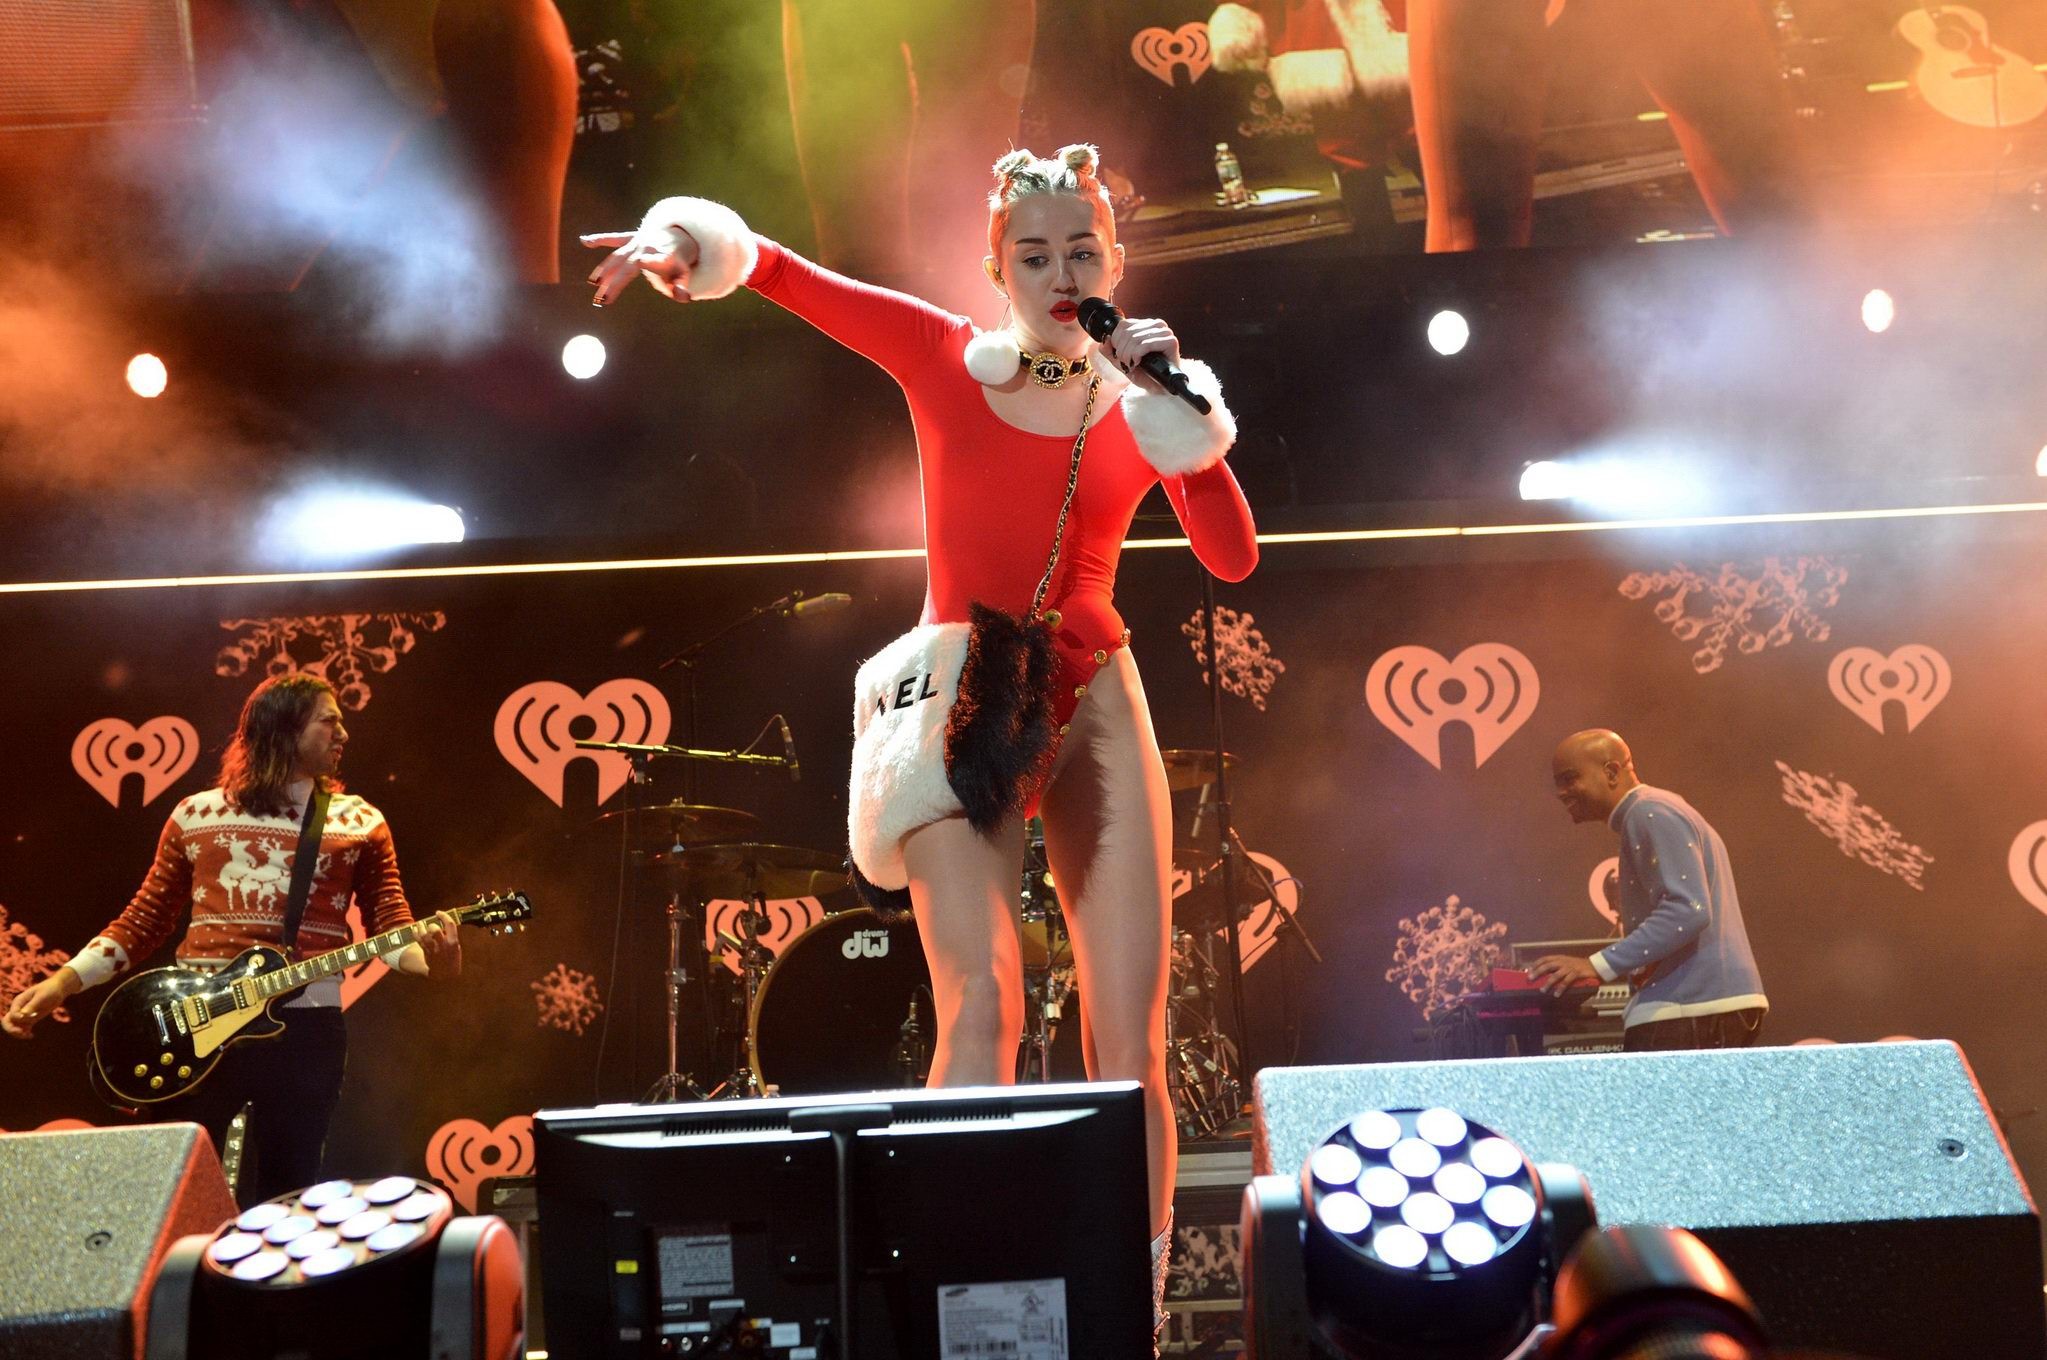 Miley Cyrus shows off pokies and ass wearing a red leotard on stage at 93.3 FLZ' #75209932